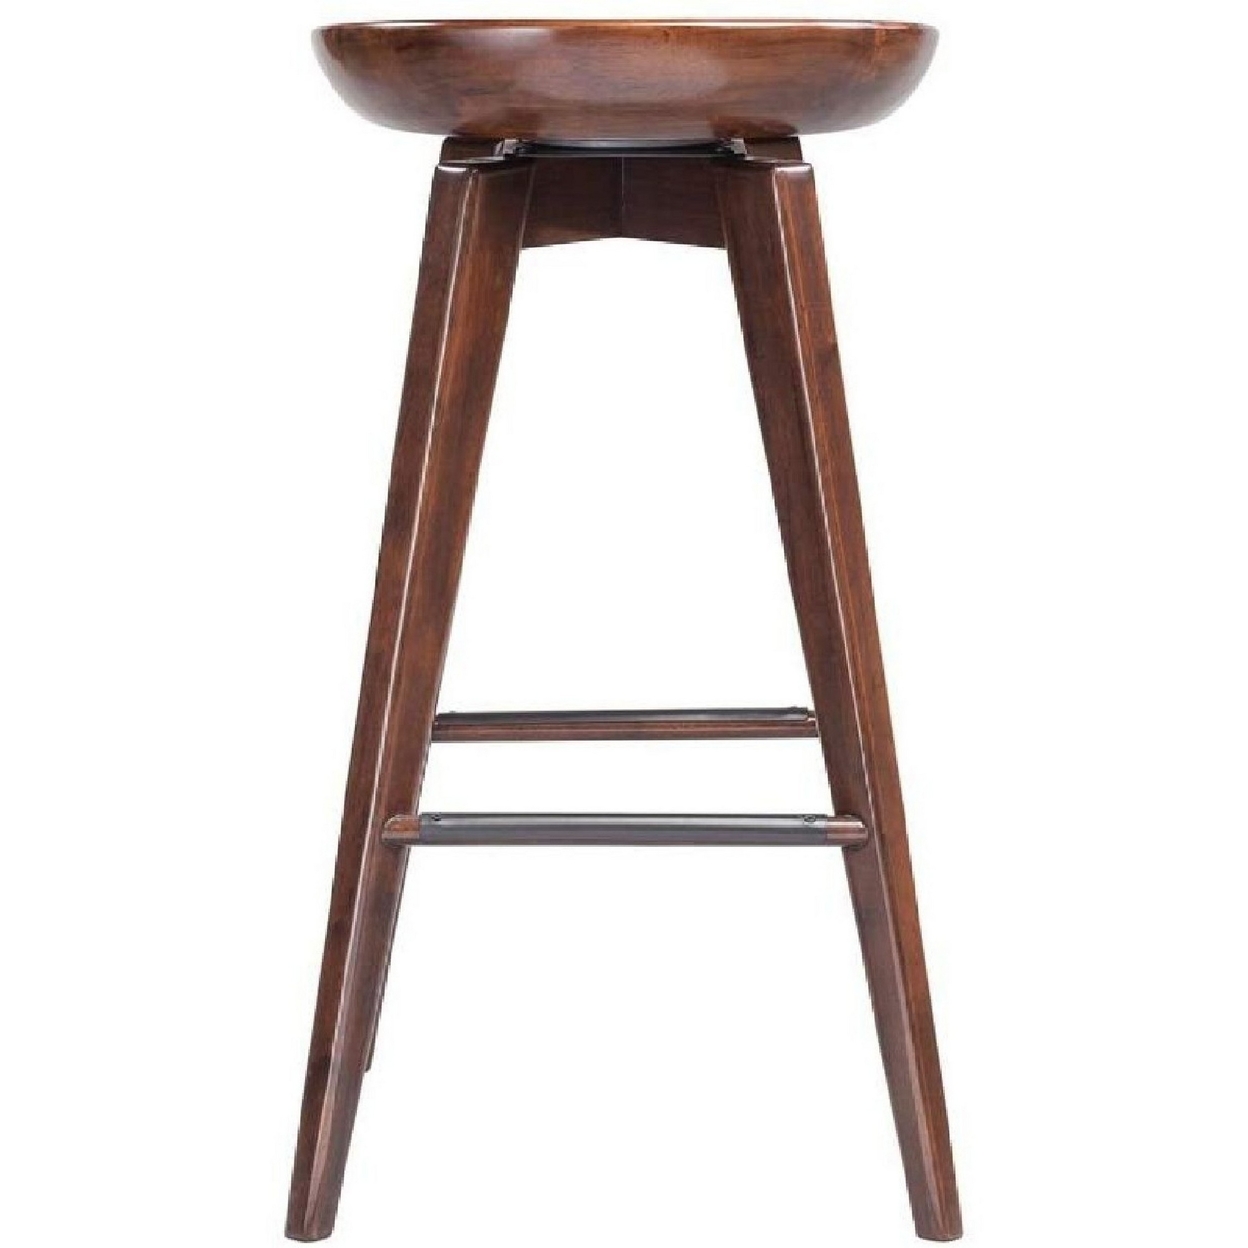 Contoured Seat Wooden Frame Swivel Barstool With Angled Legs, Natural Brown- Saltoro Sherpi